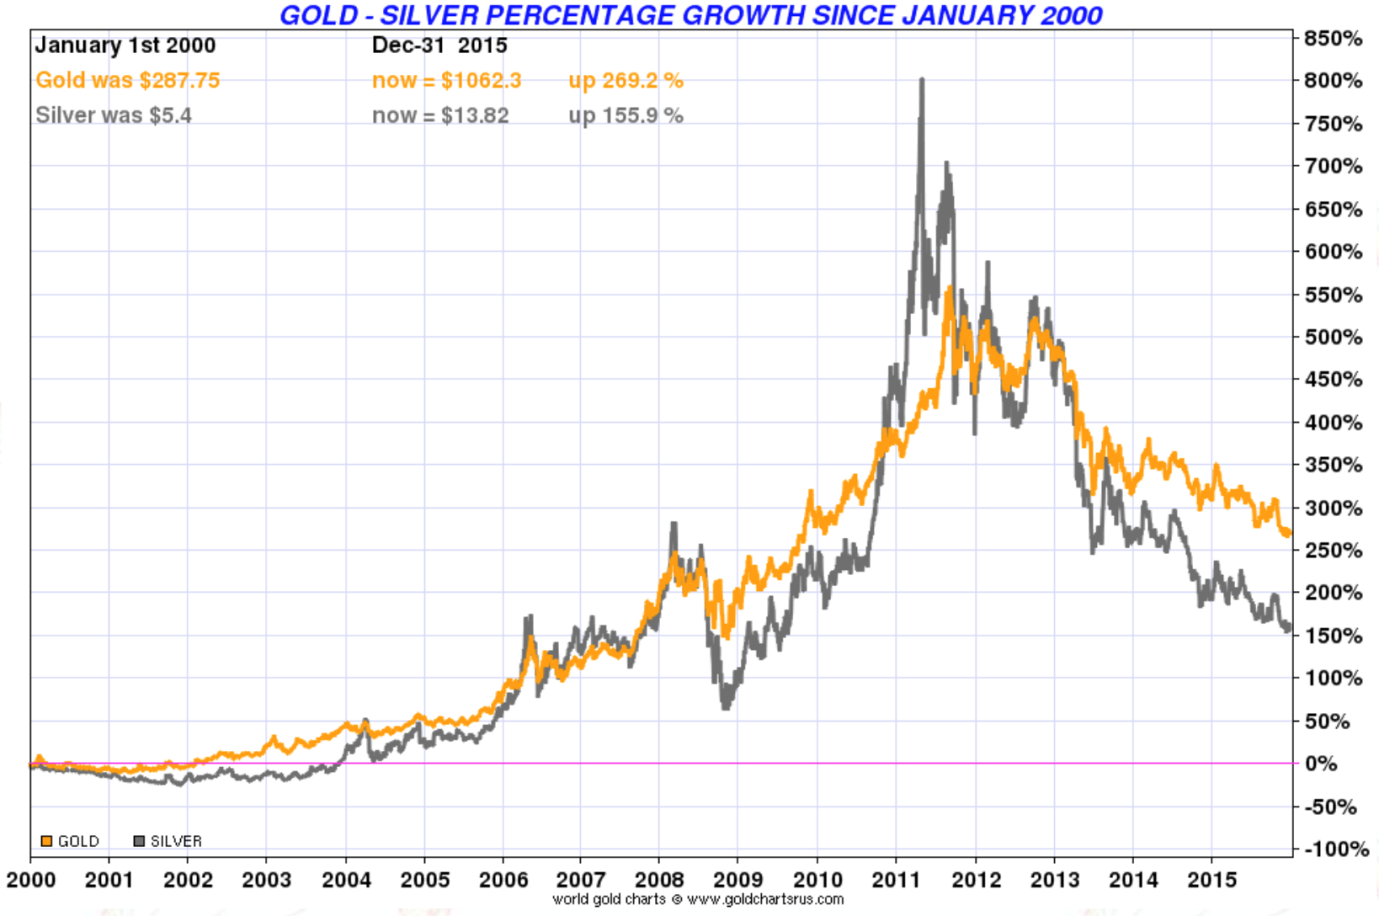 Gold - Silver percentage growth since january 2000